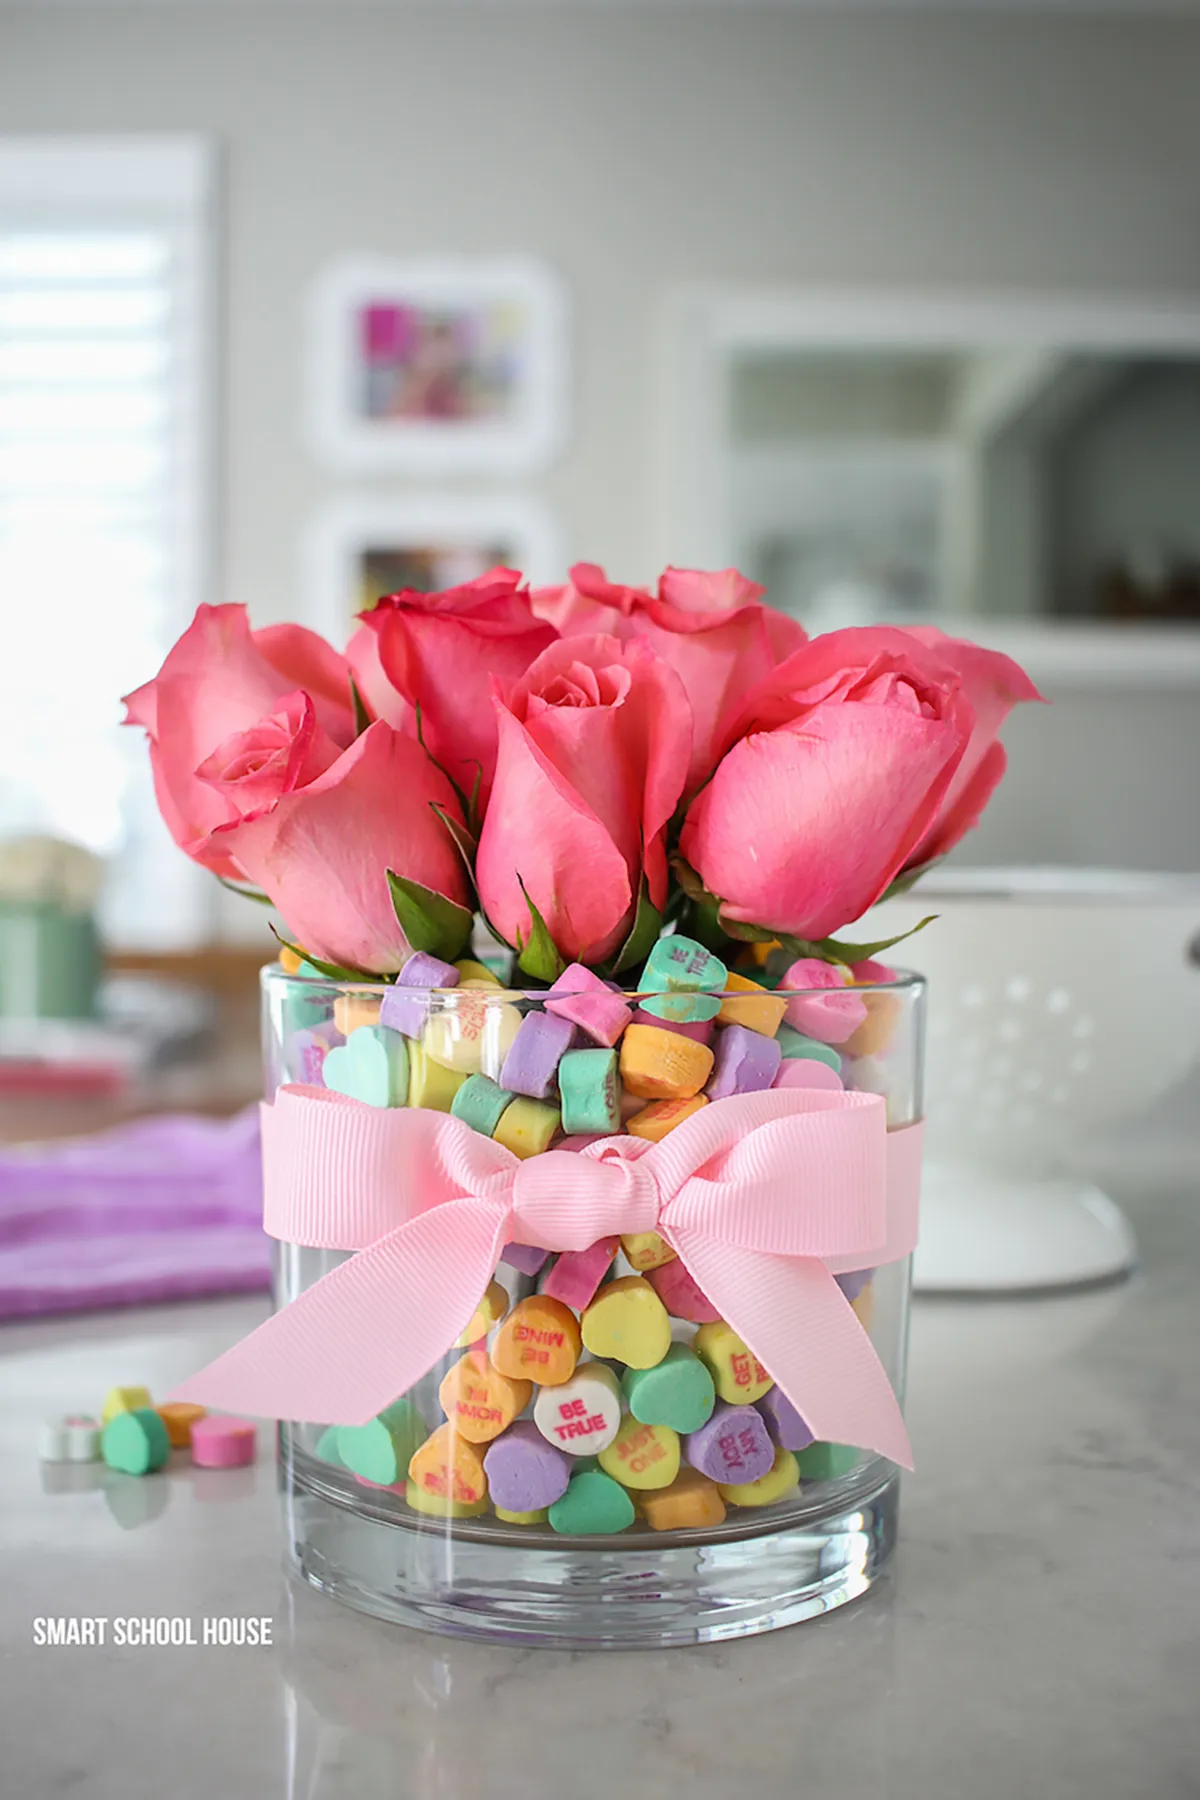 A vase filled with pink roses and love heart sweets